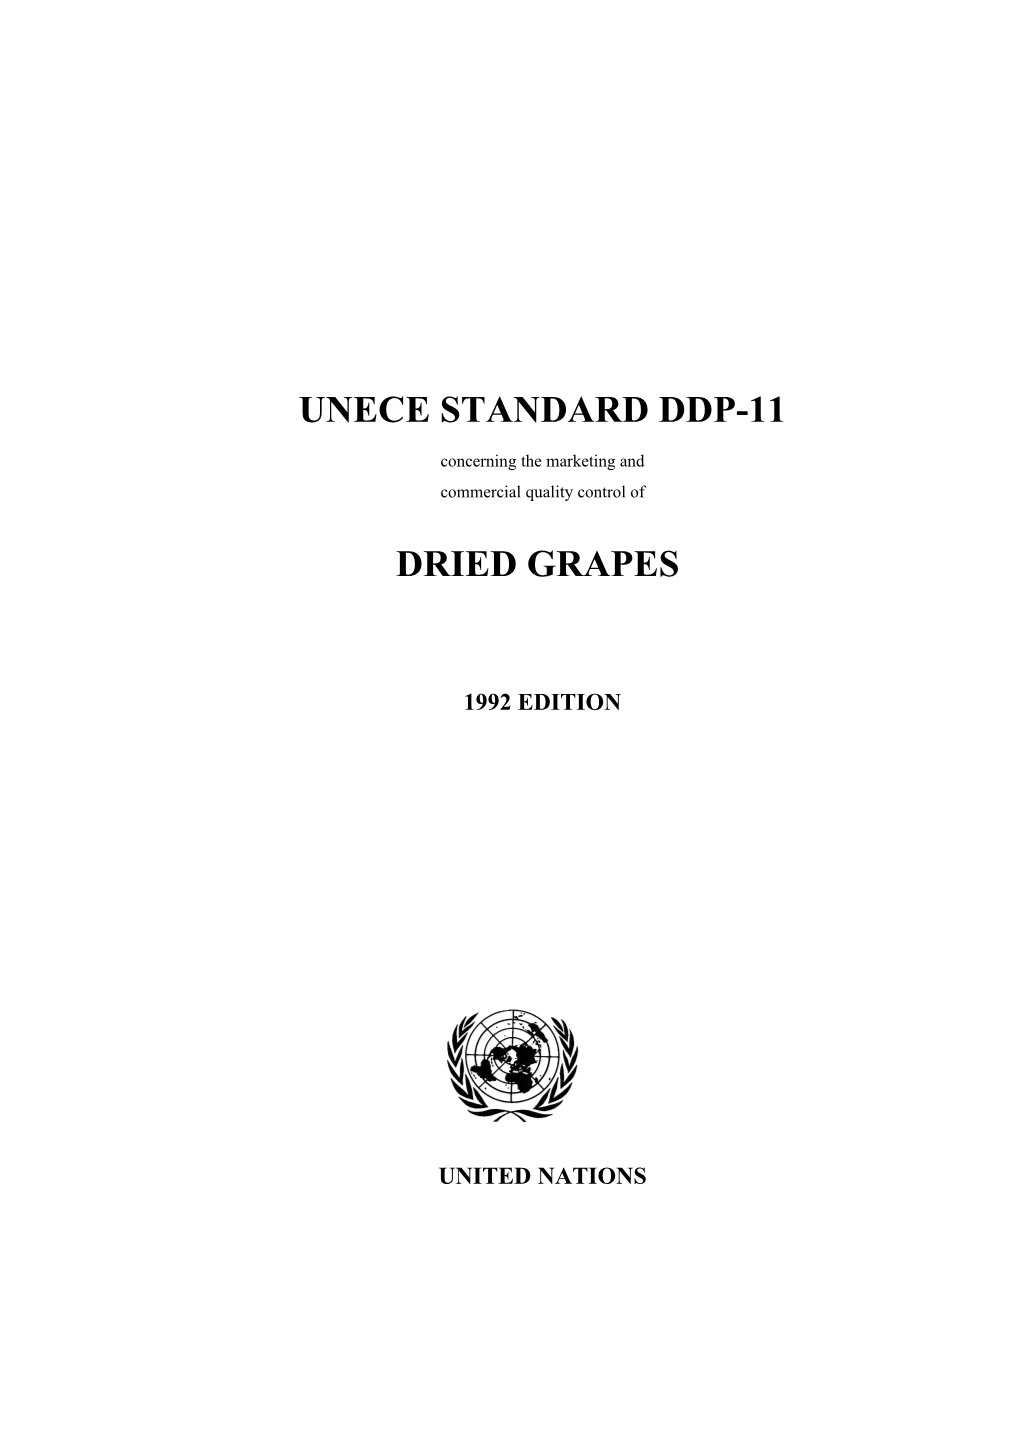 UNECE Standard for Dried Grapes (DDP-11)